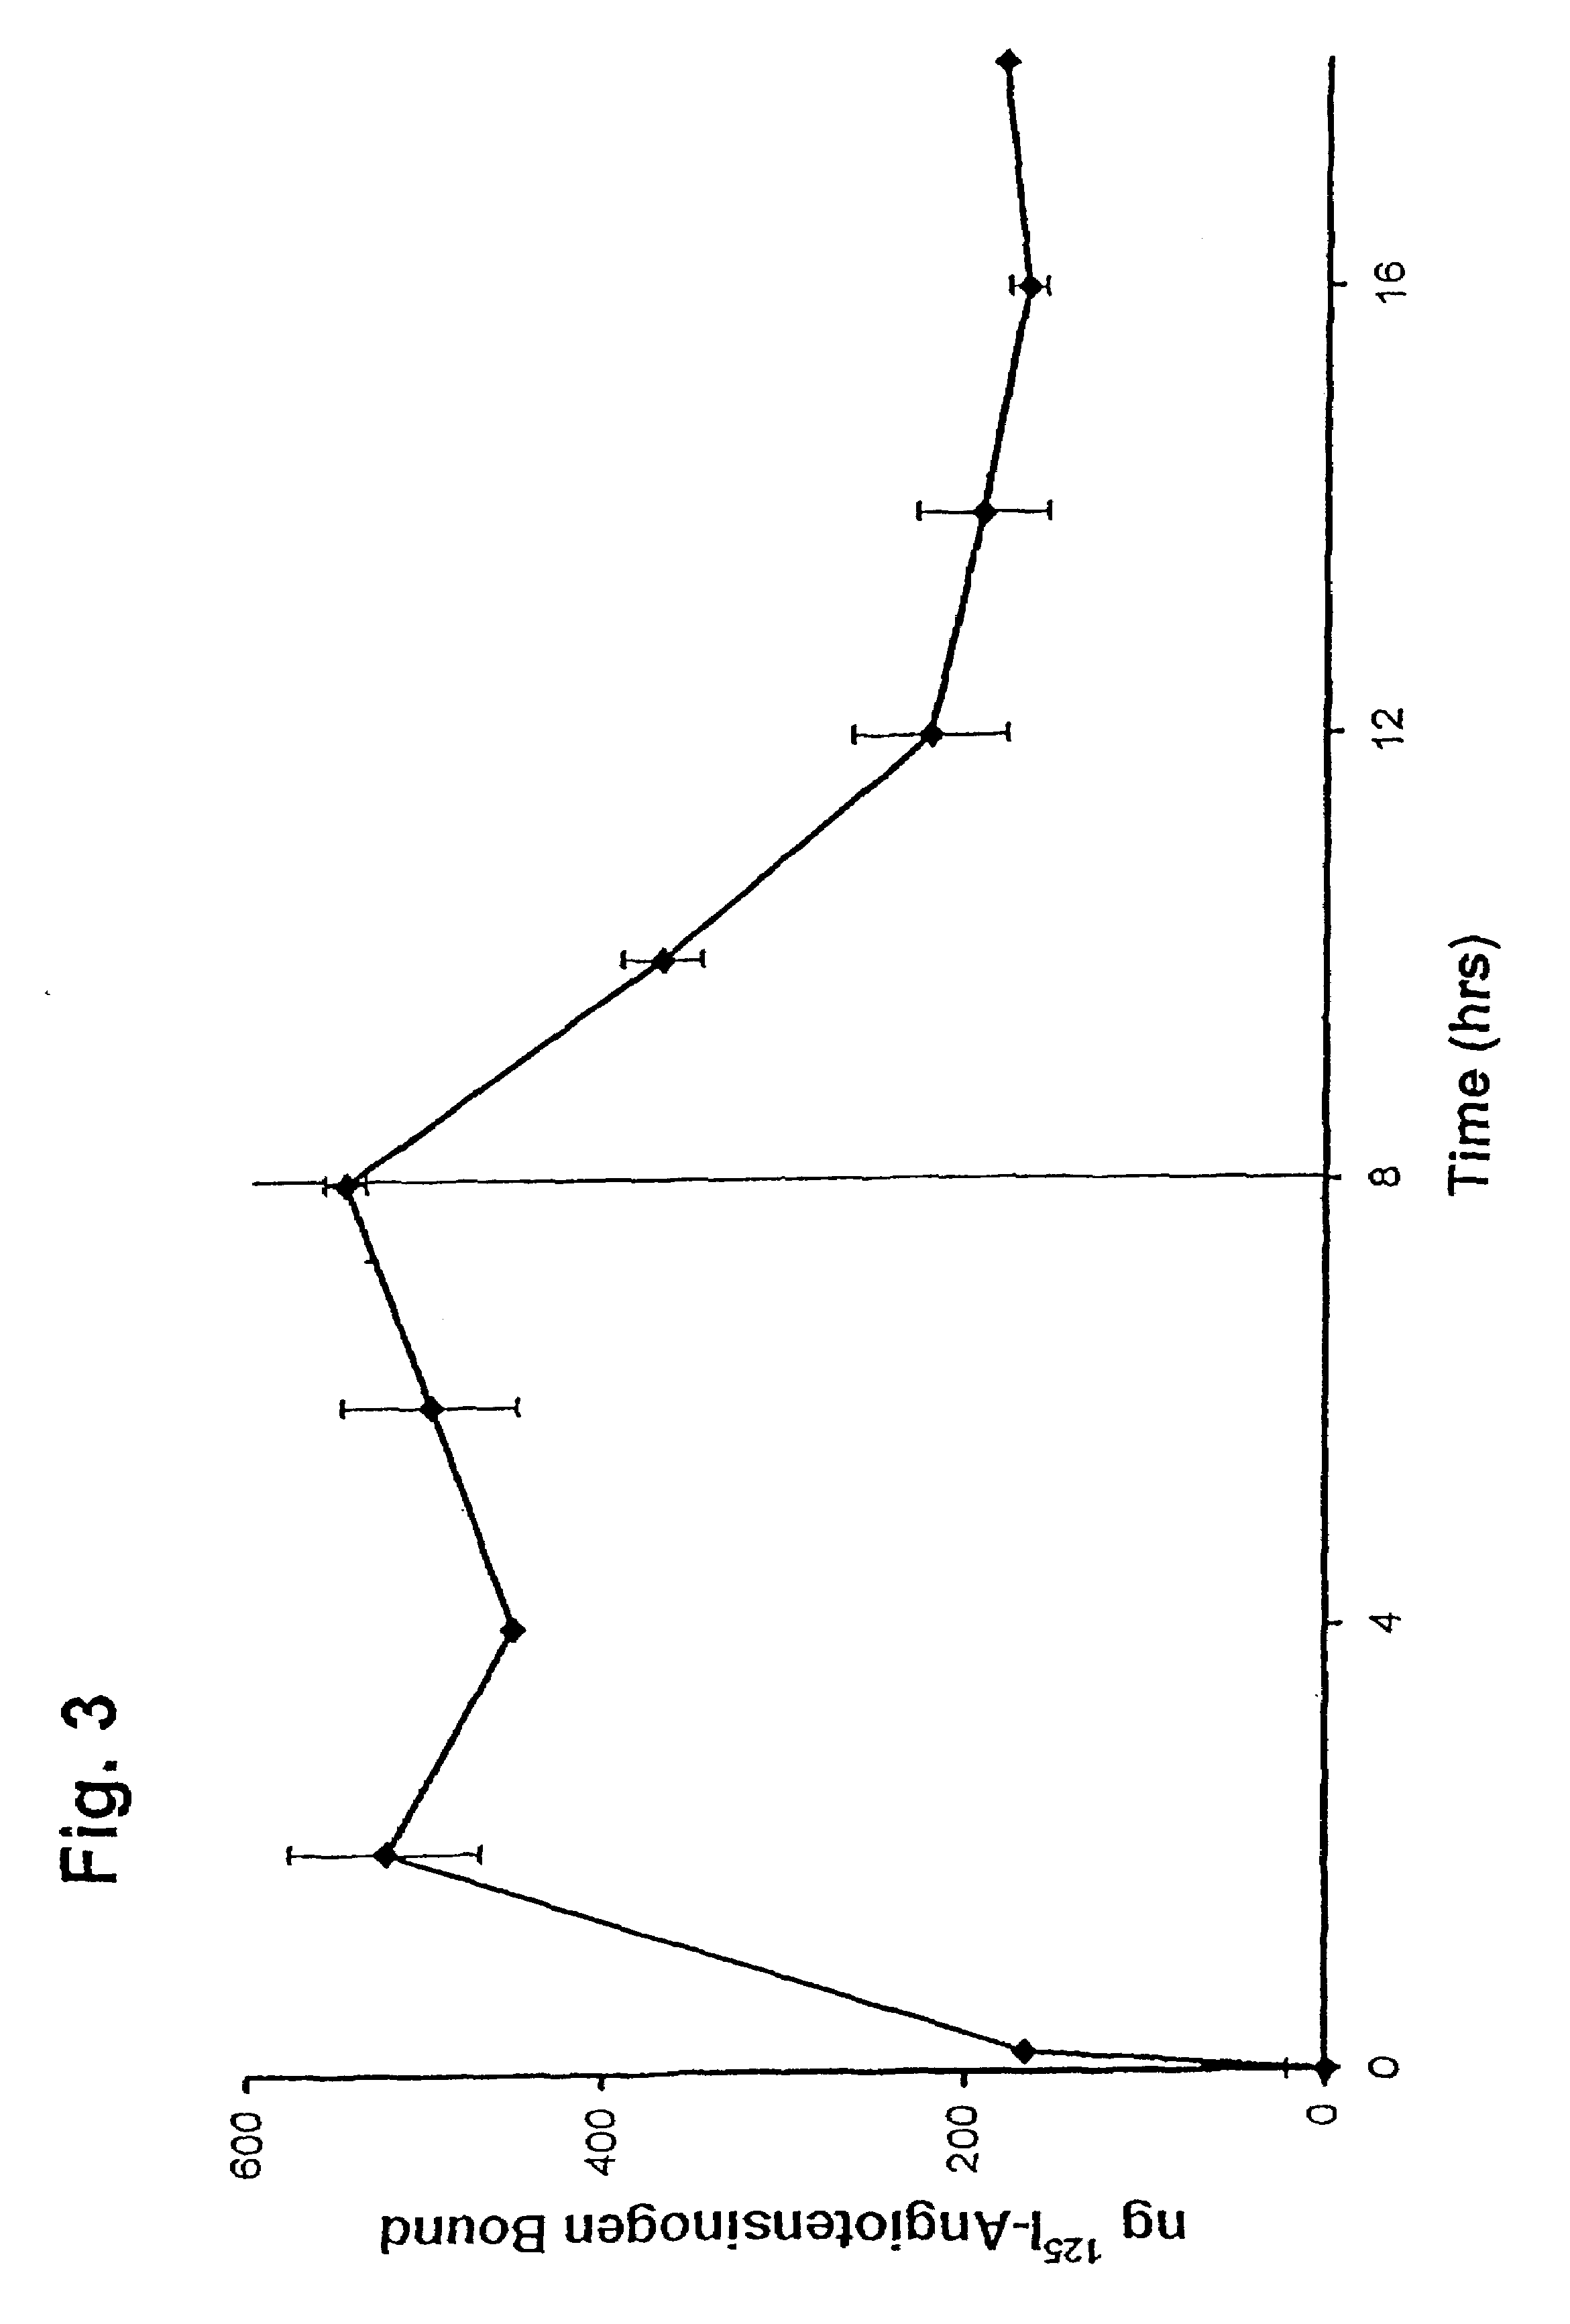 Method of detecting and evaluating angiotensinogen receptor-modulating compounds using placental cells